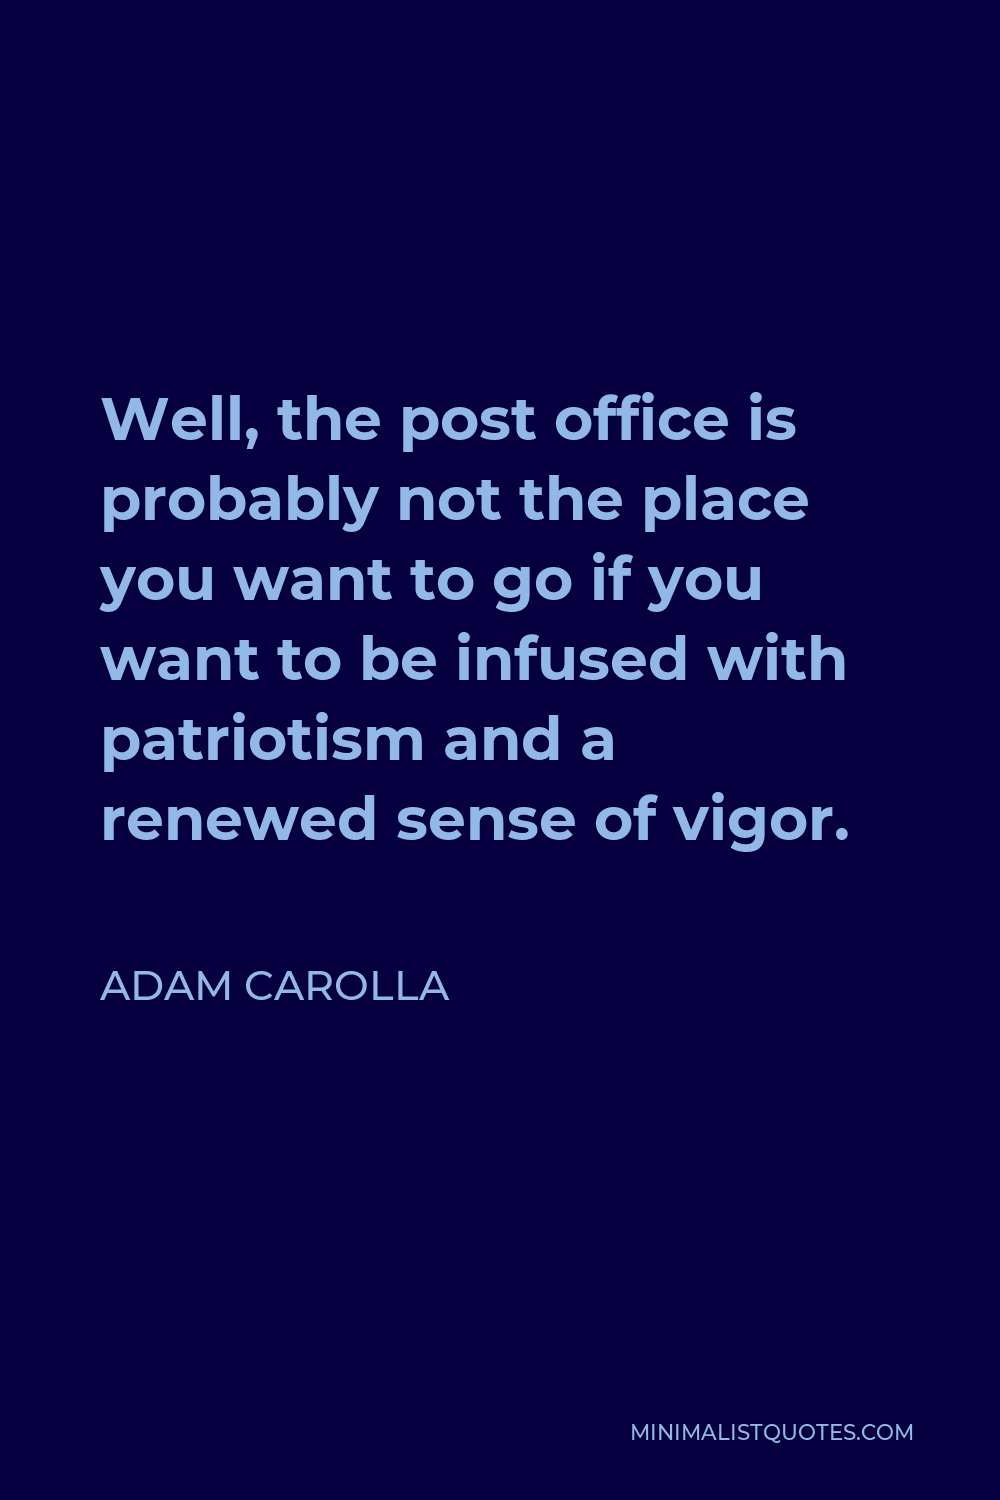 Adam Carolla Quote - Well, the post office is probably not the place you want to go if you want to be infused with patriotism and a renewed sense of vigor.